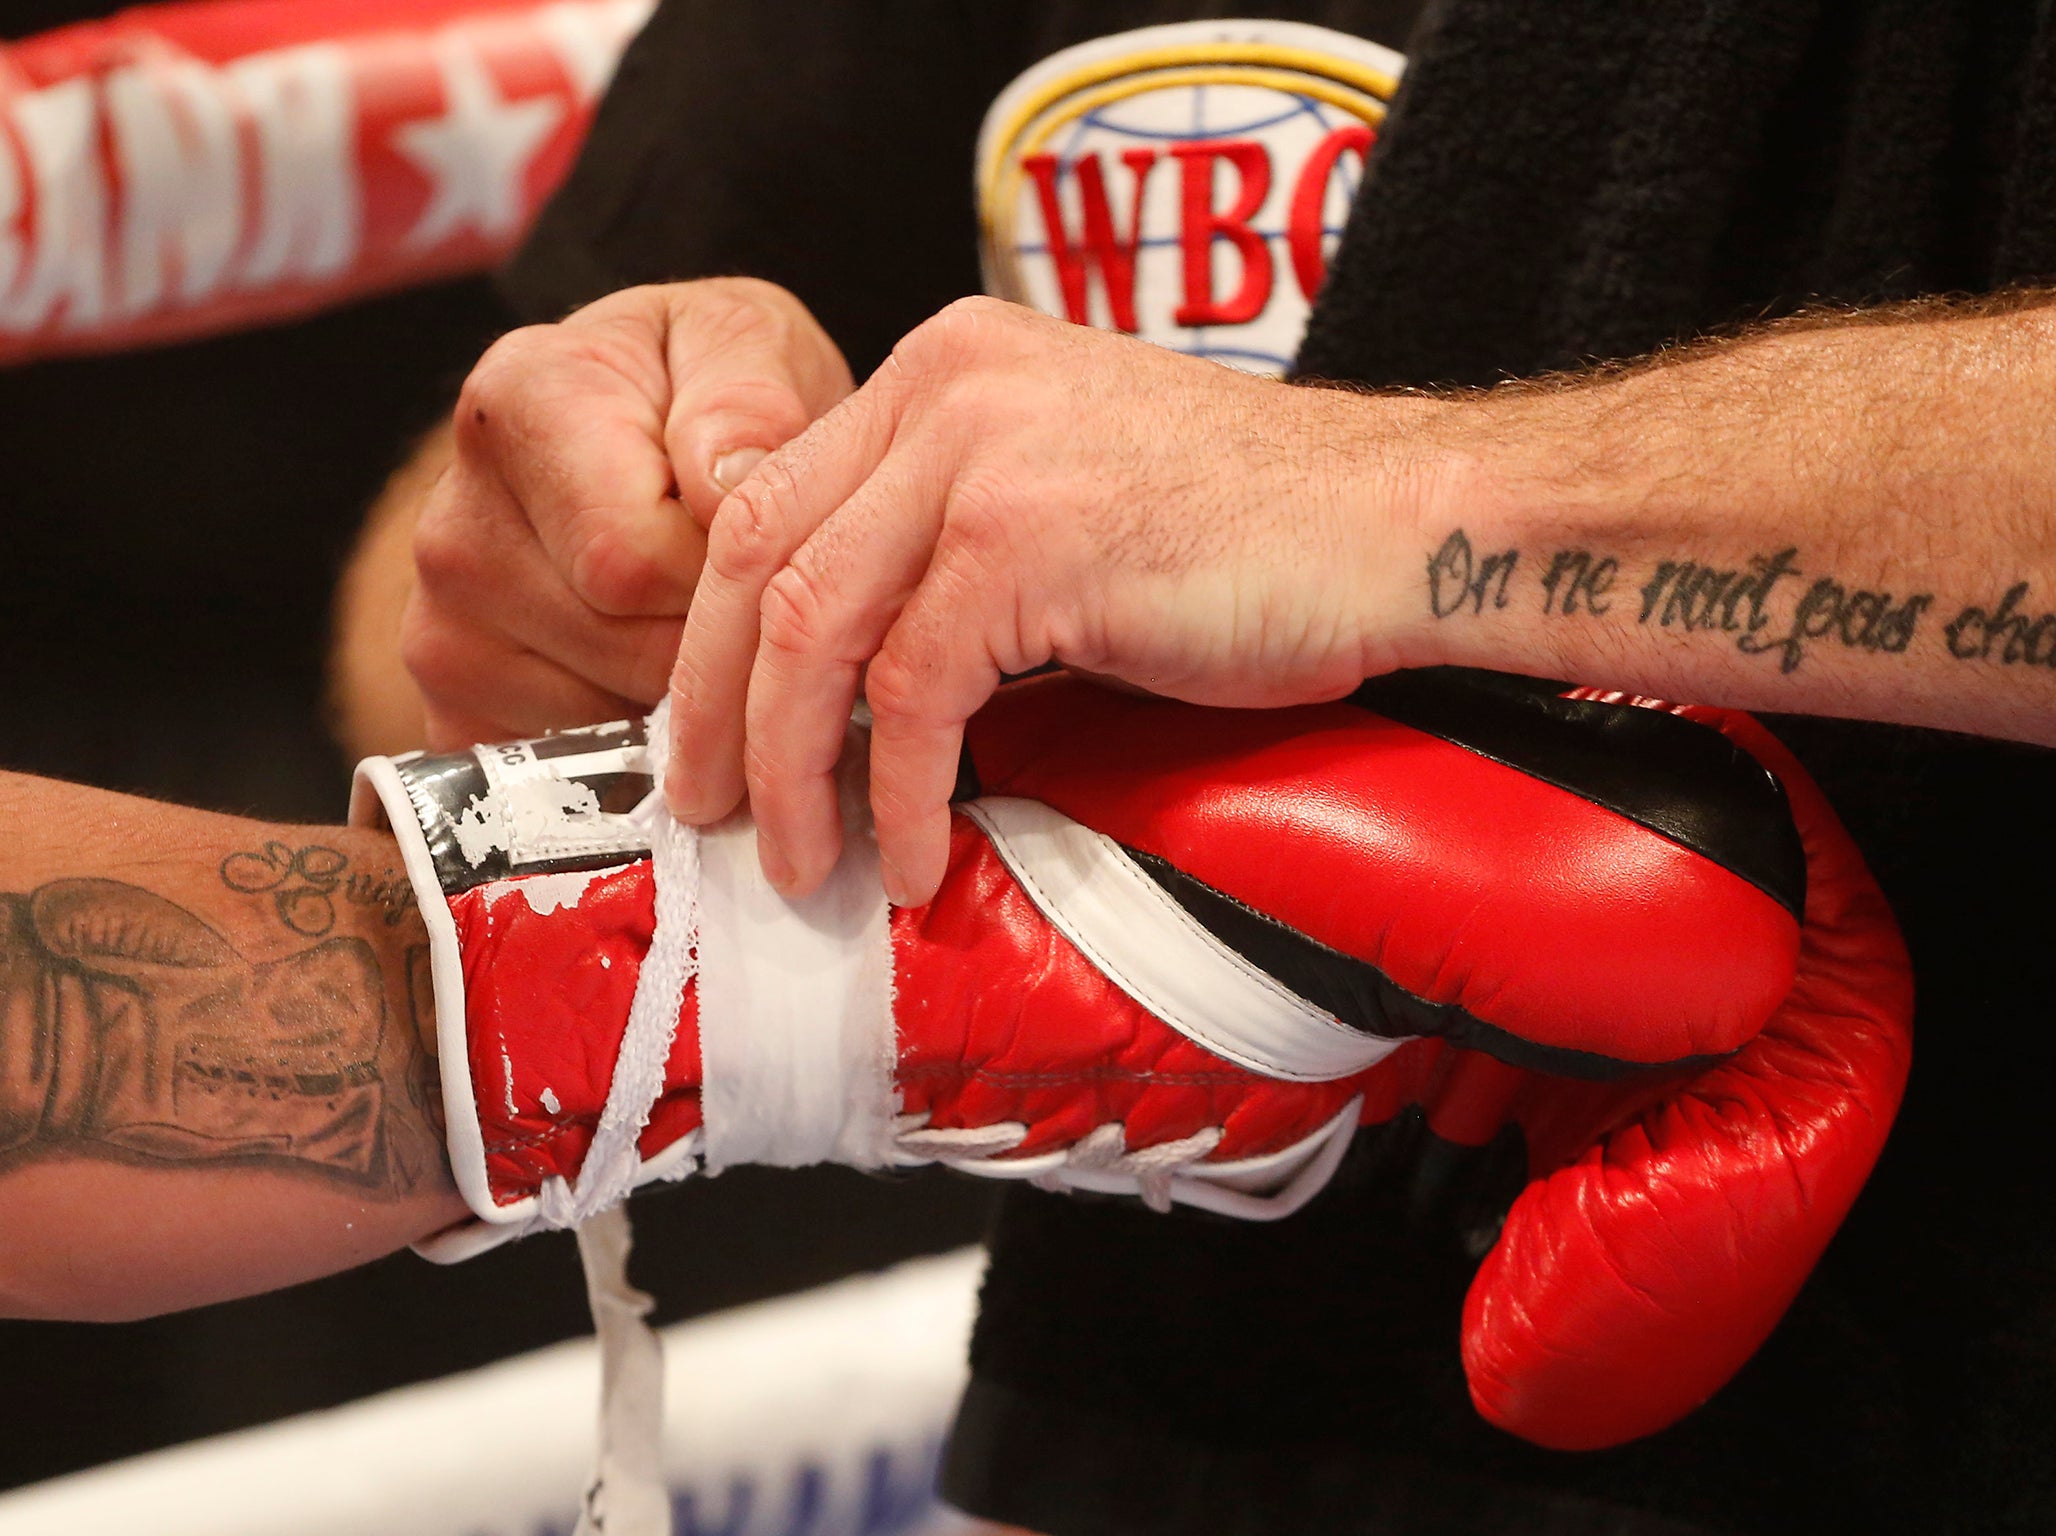 Lighter 8oz gloves are to be used for the fight